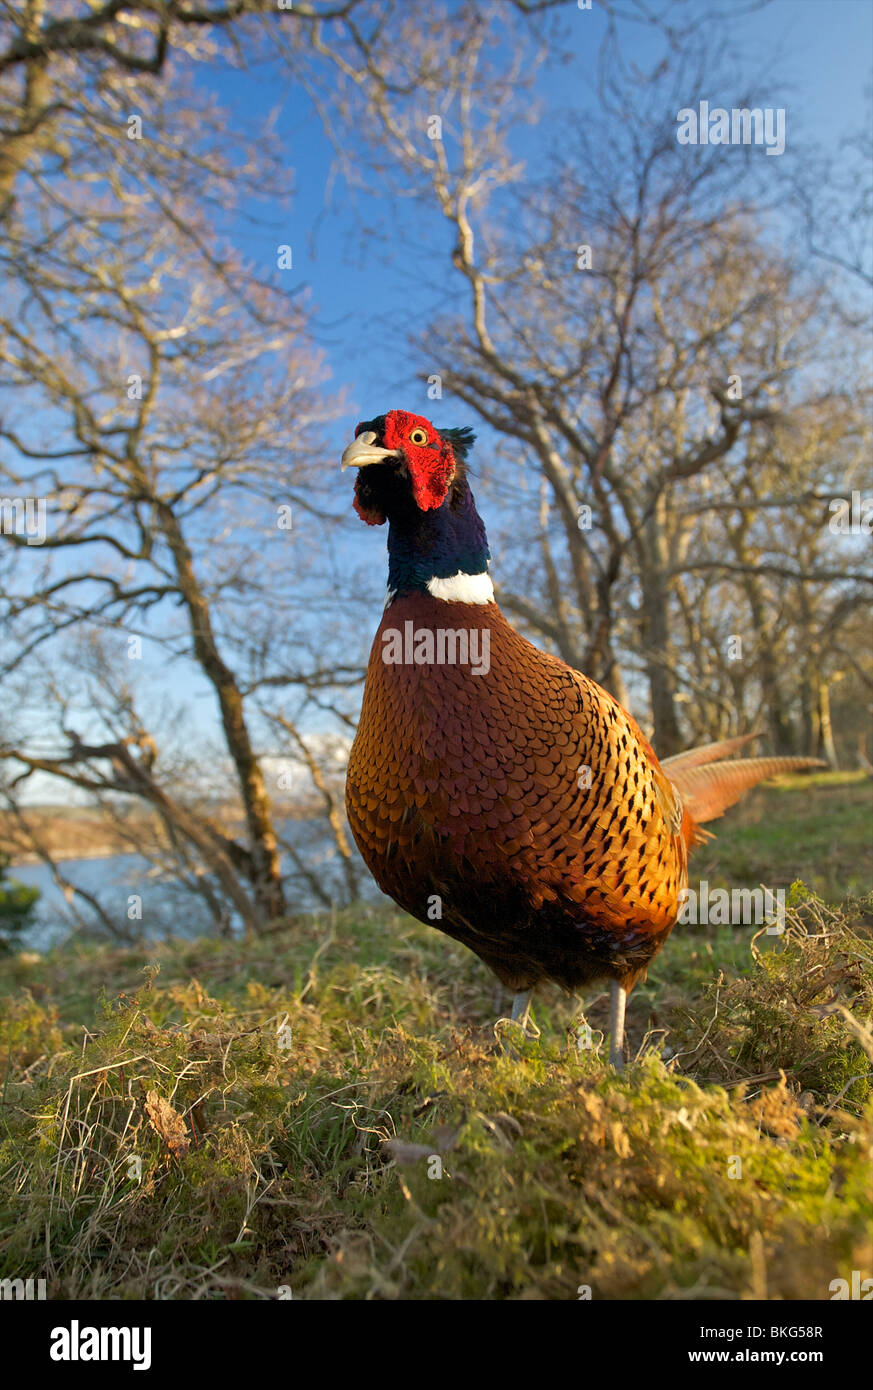 Wide angle view of a cock pheasant in an oak woodland Stock Photo